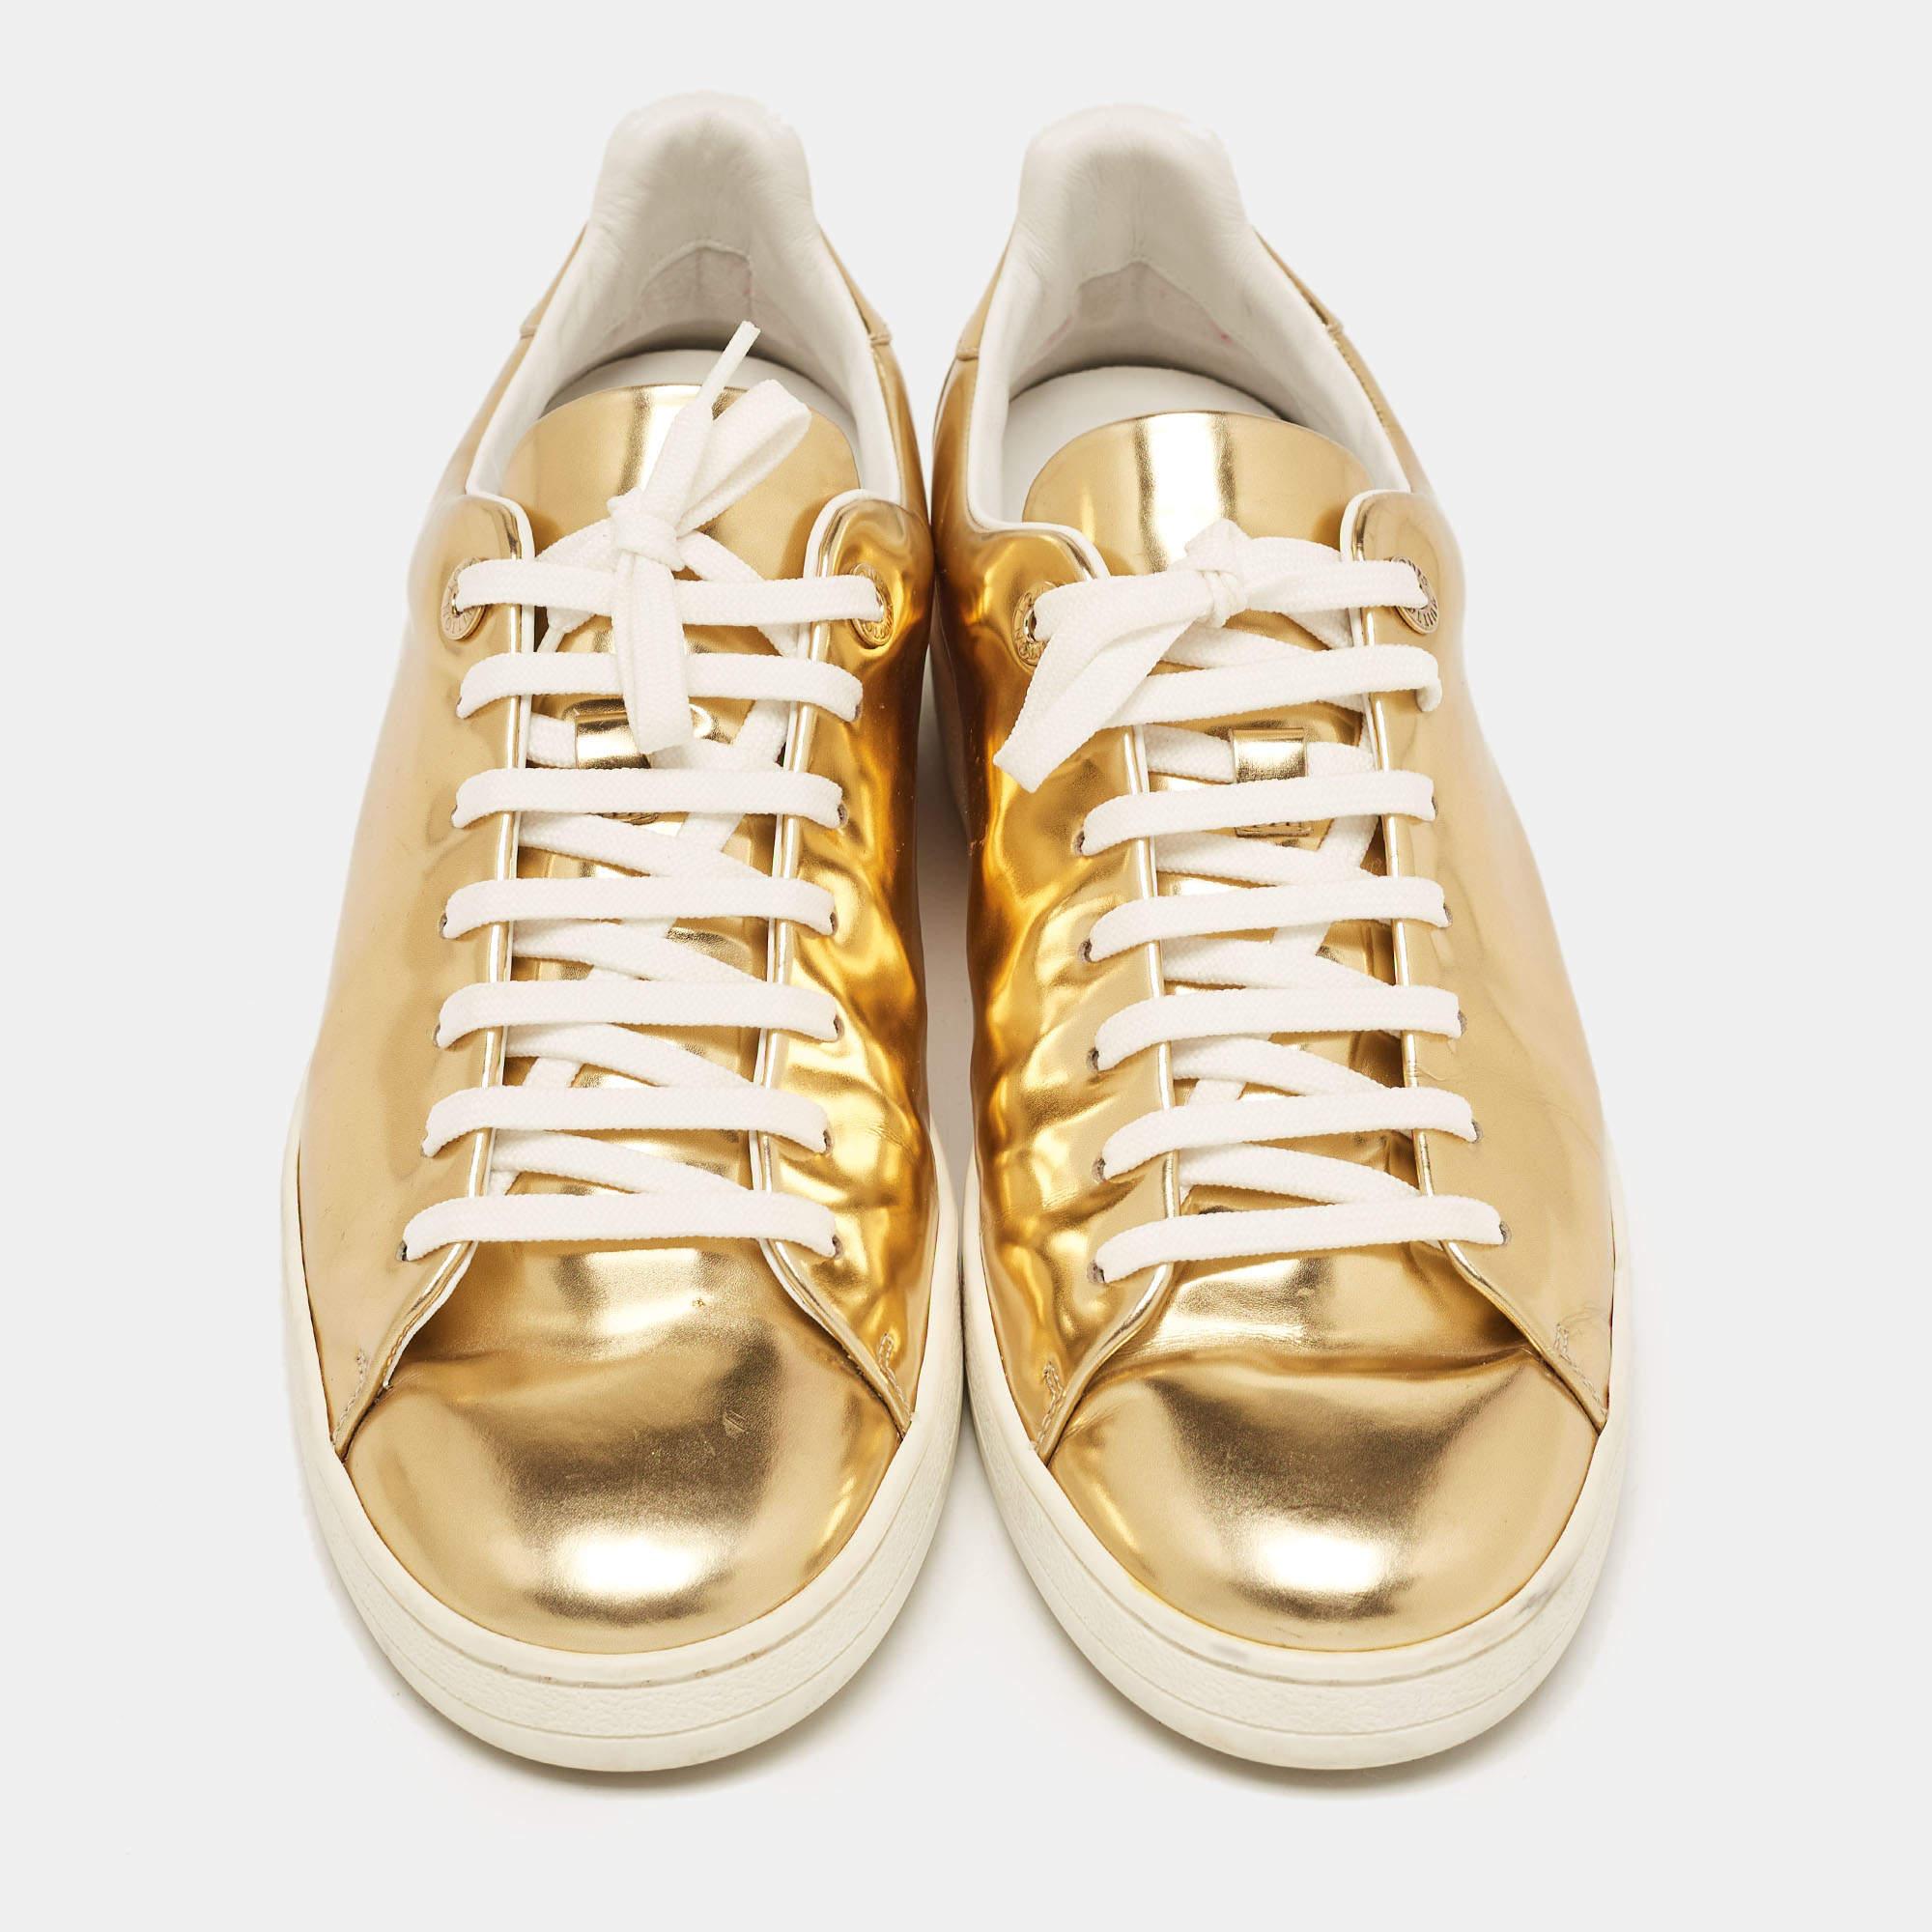 Louis Vuitton Gold Leather Frontrow Low Top Sneakers Size 40.5 In Good Condition For Sale In Dubai, Al Qouz 2